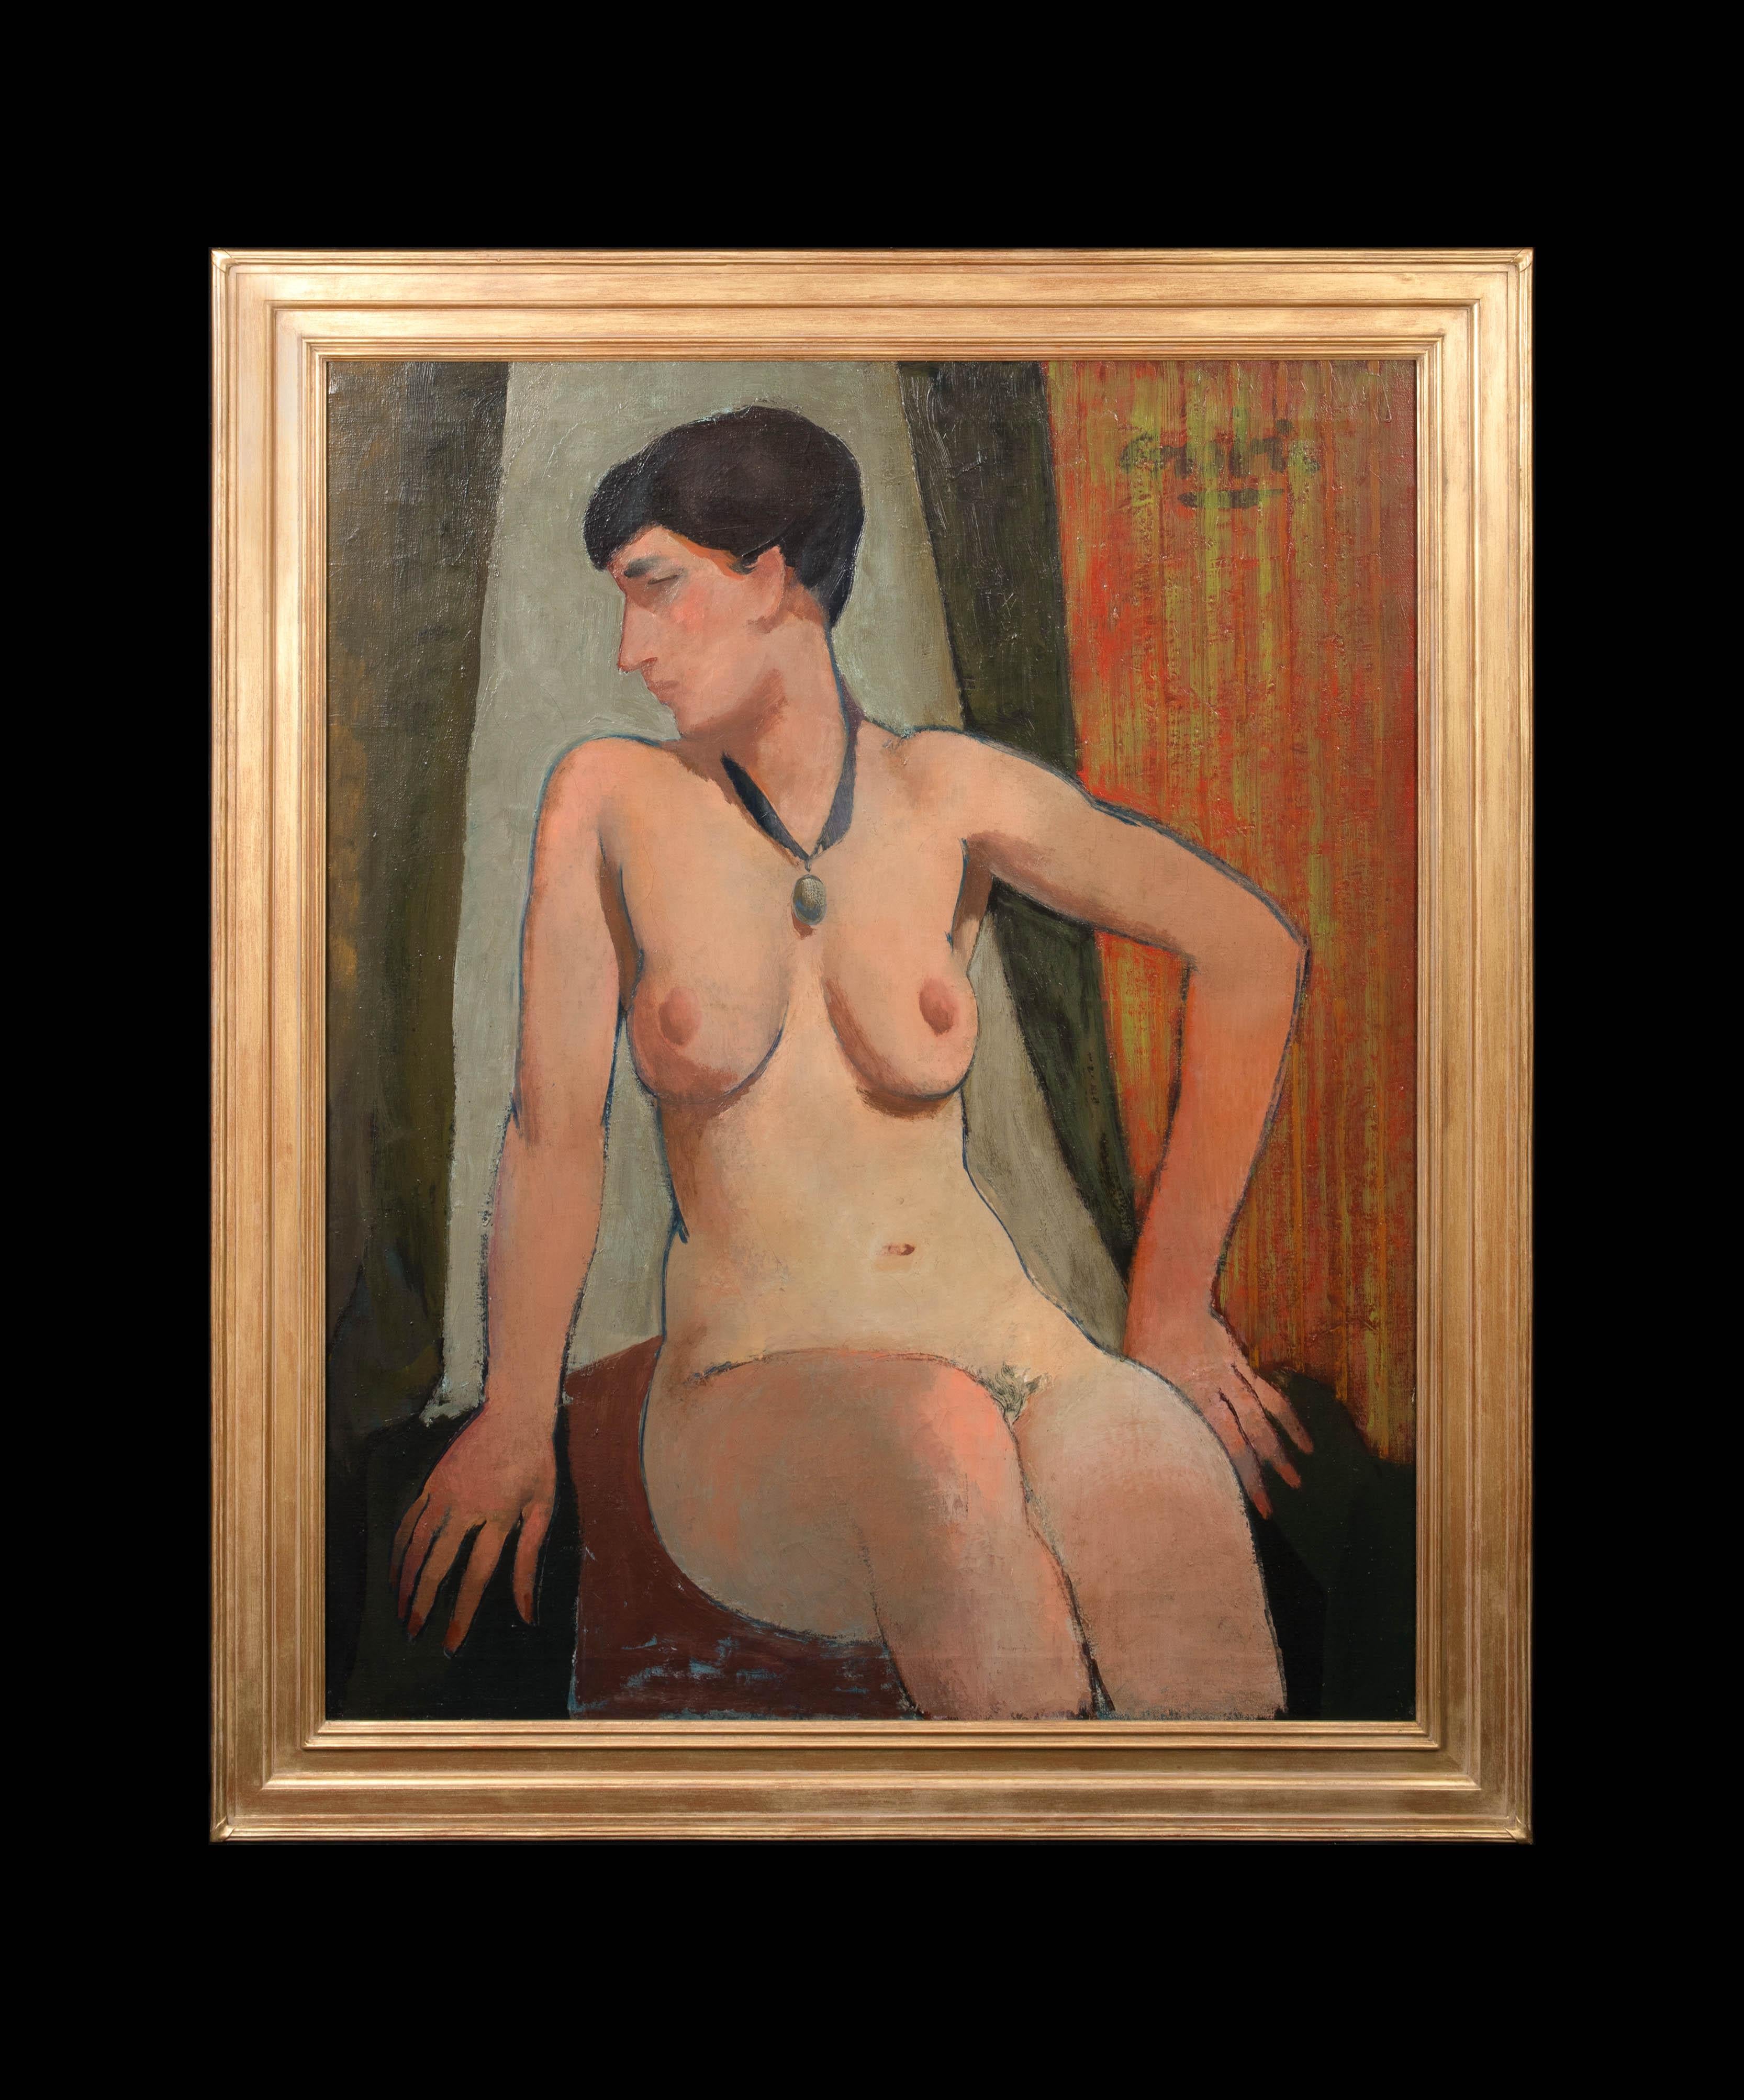 MODIGLIANI NUDE WITH NECKLACE, circa 1940  by WILLIAM CROSBIE (1915-1999) - Painting by William Crosbie